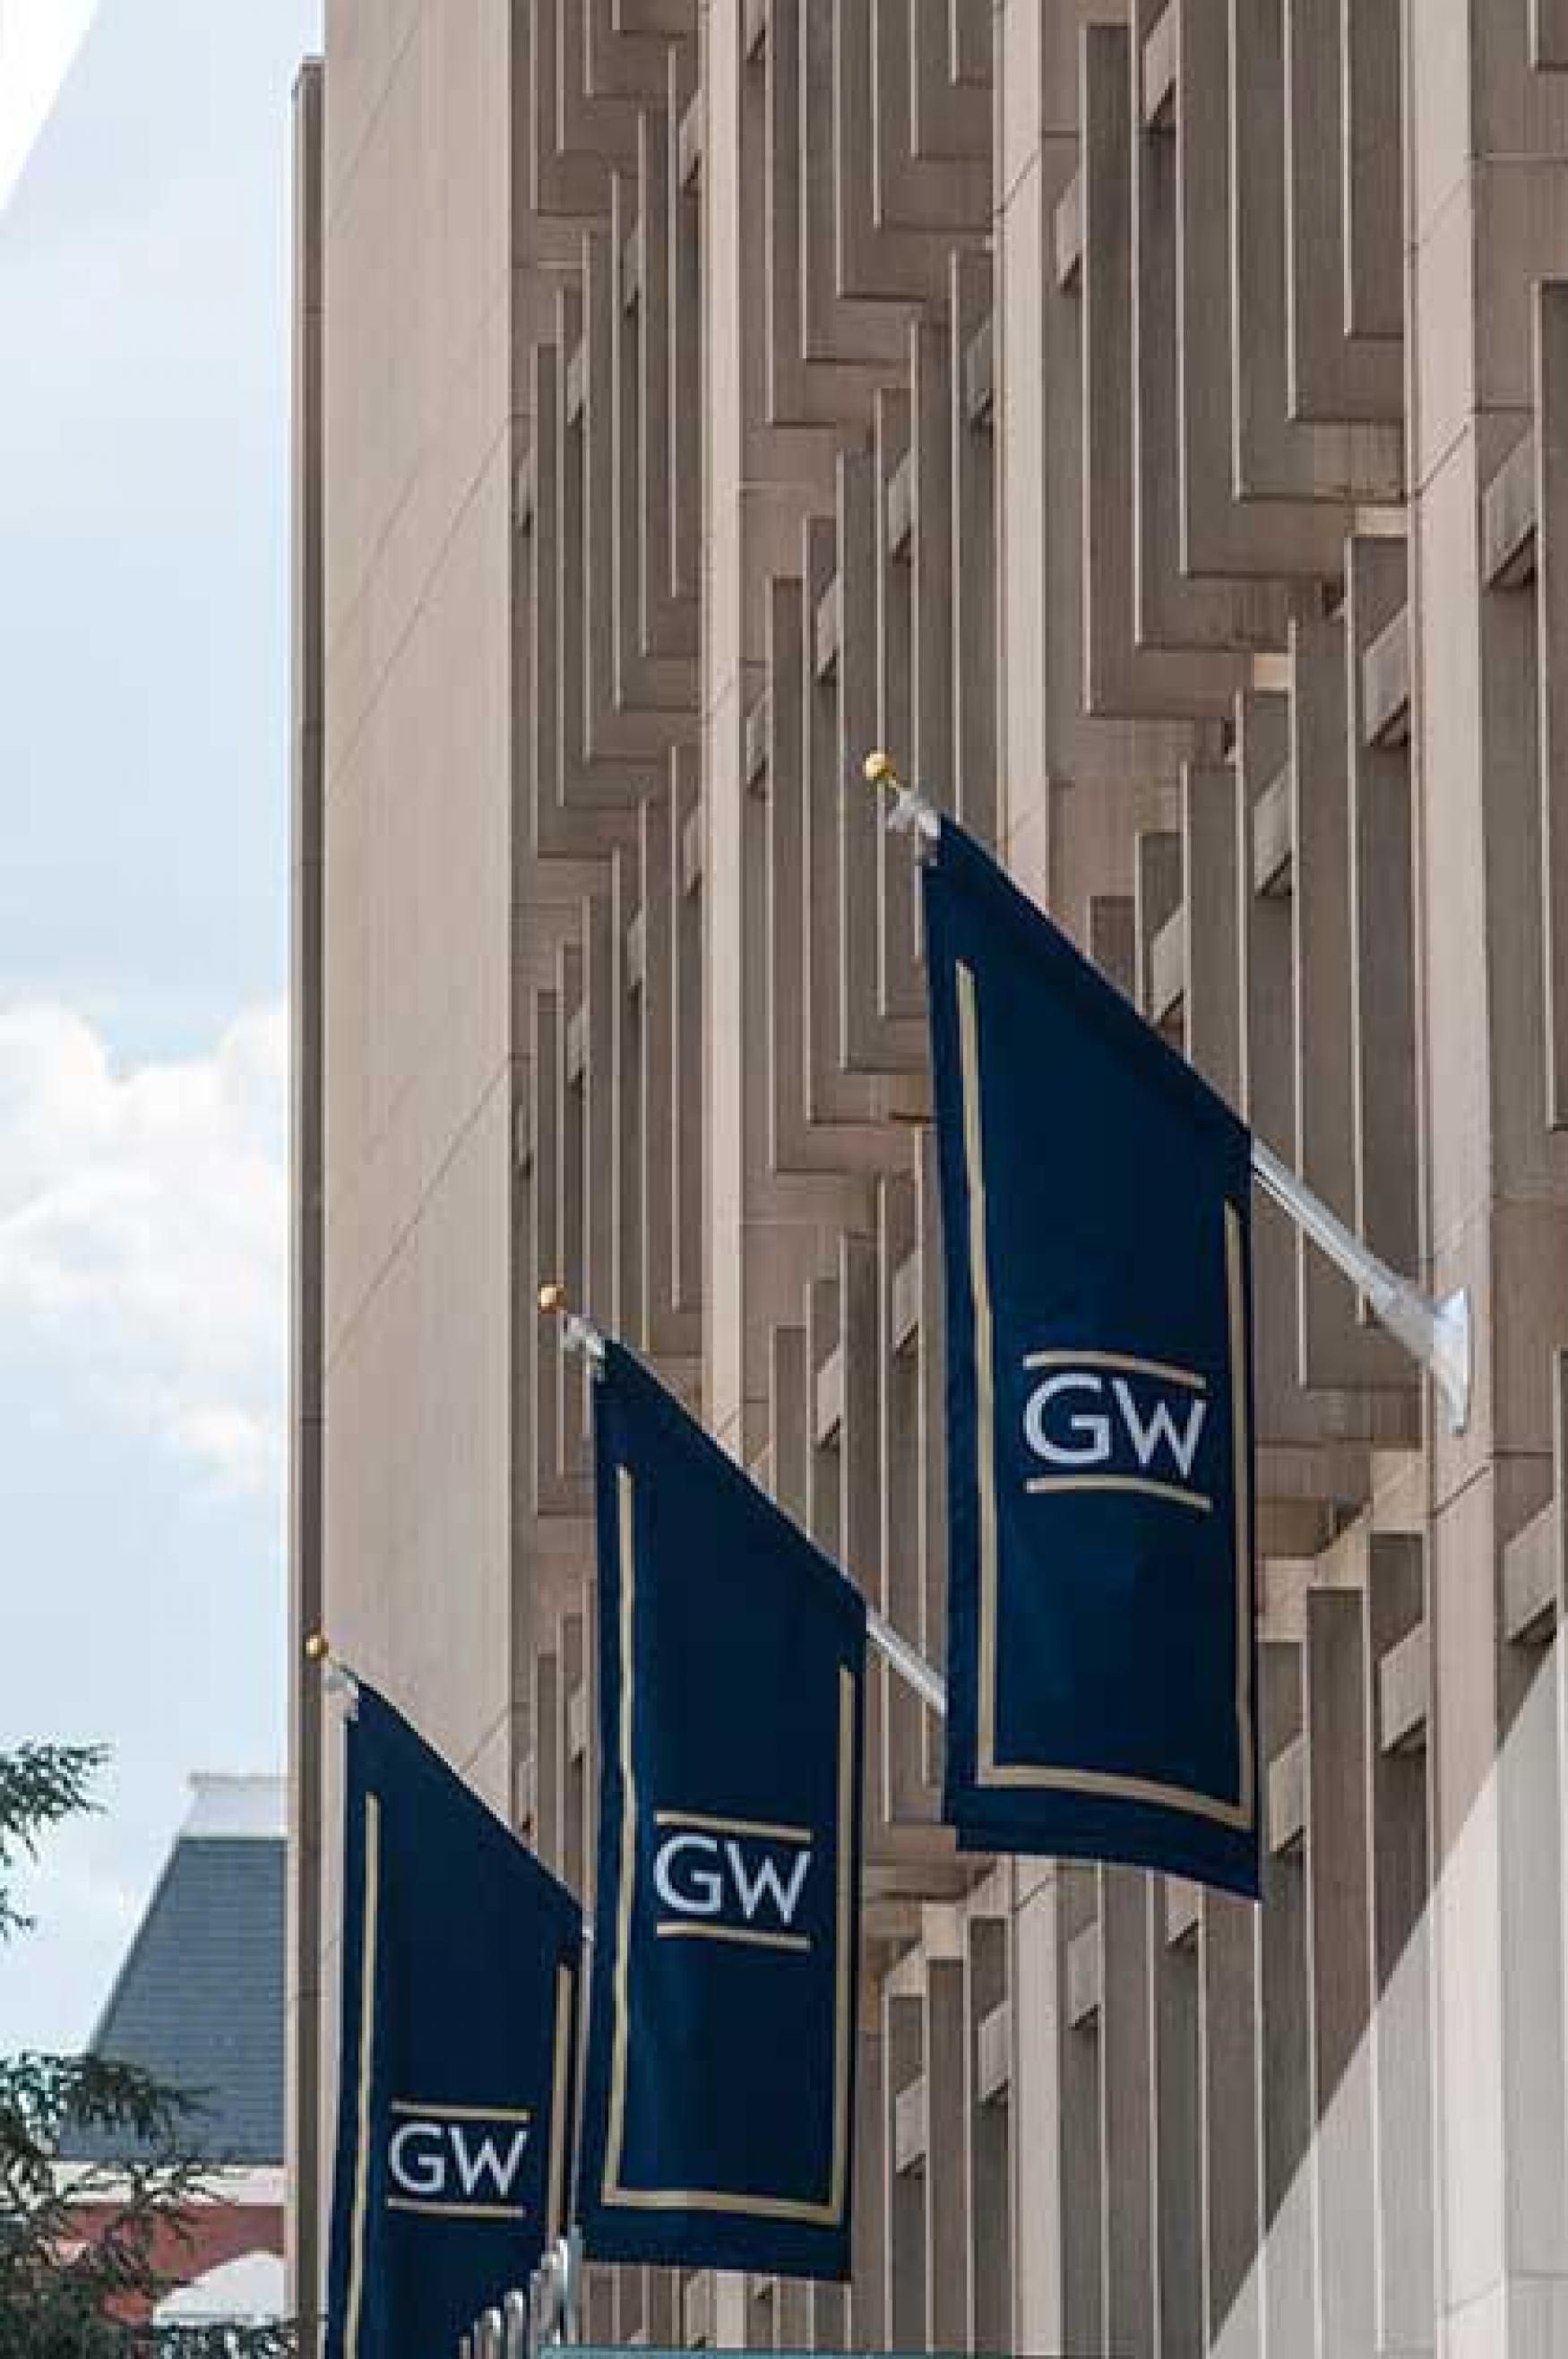 Three "GW" flags hang from a building